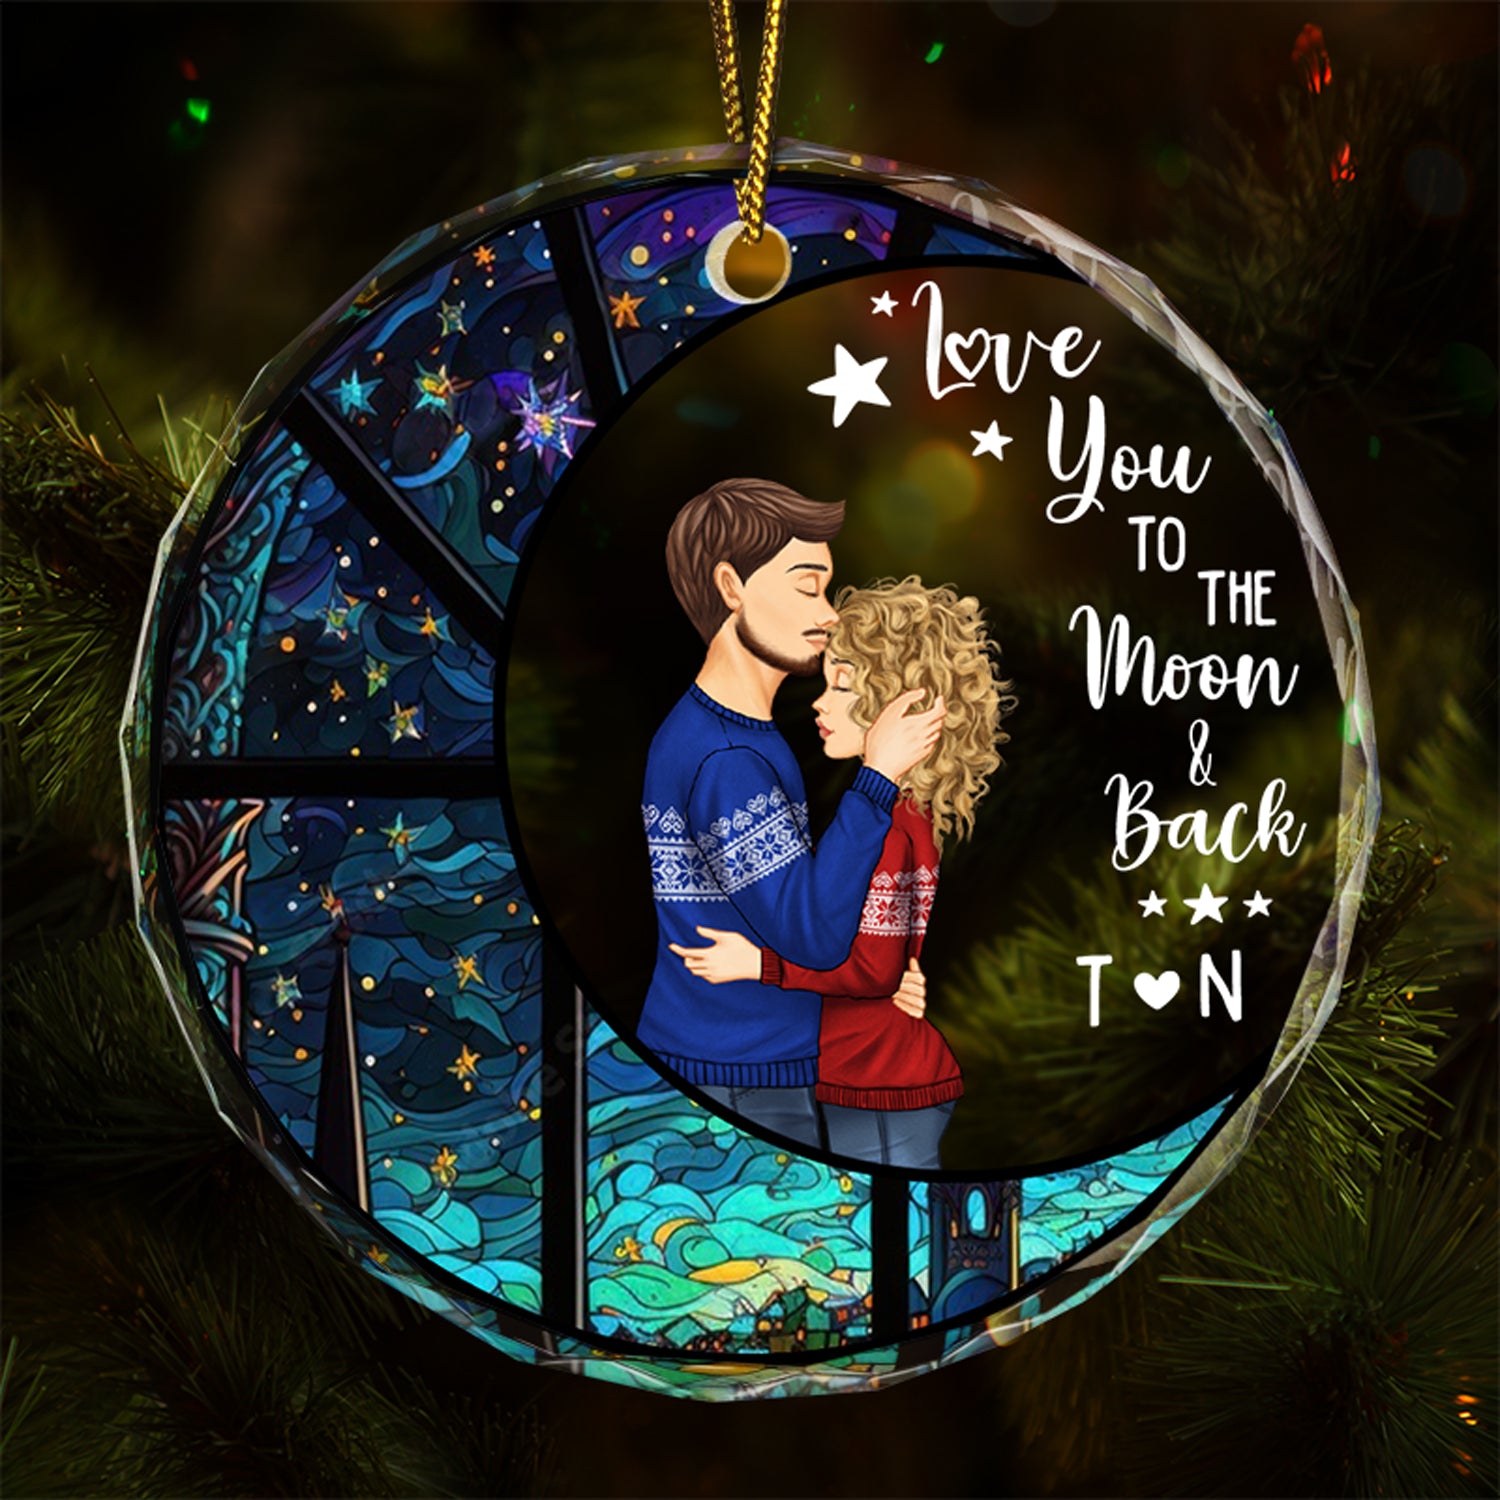 Moon & Back - Christmas Gift For Couples - Personalized Circle Glass Ornament